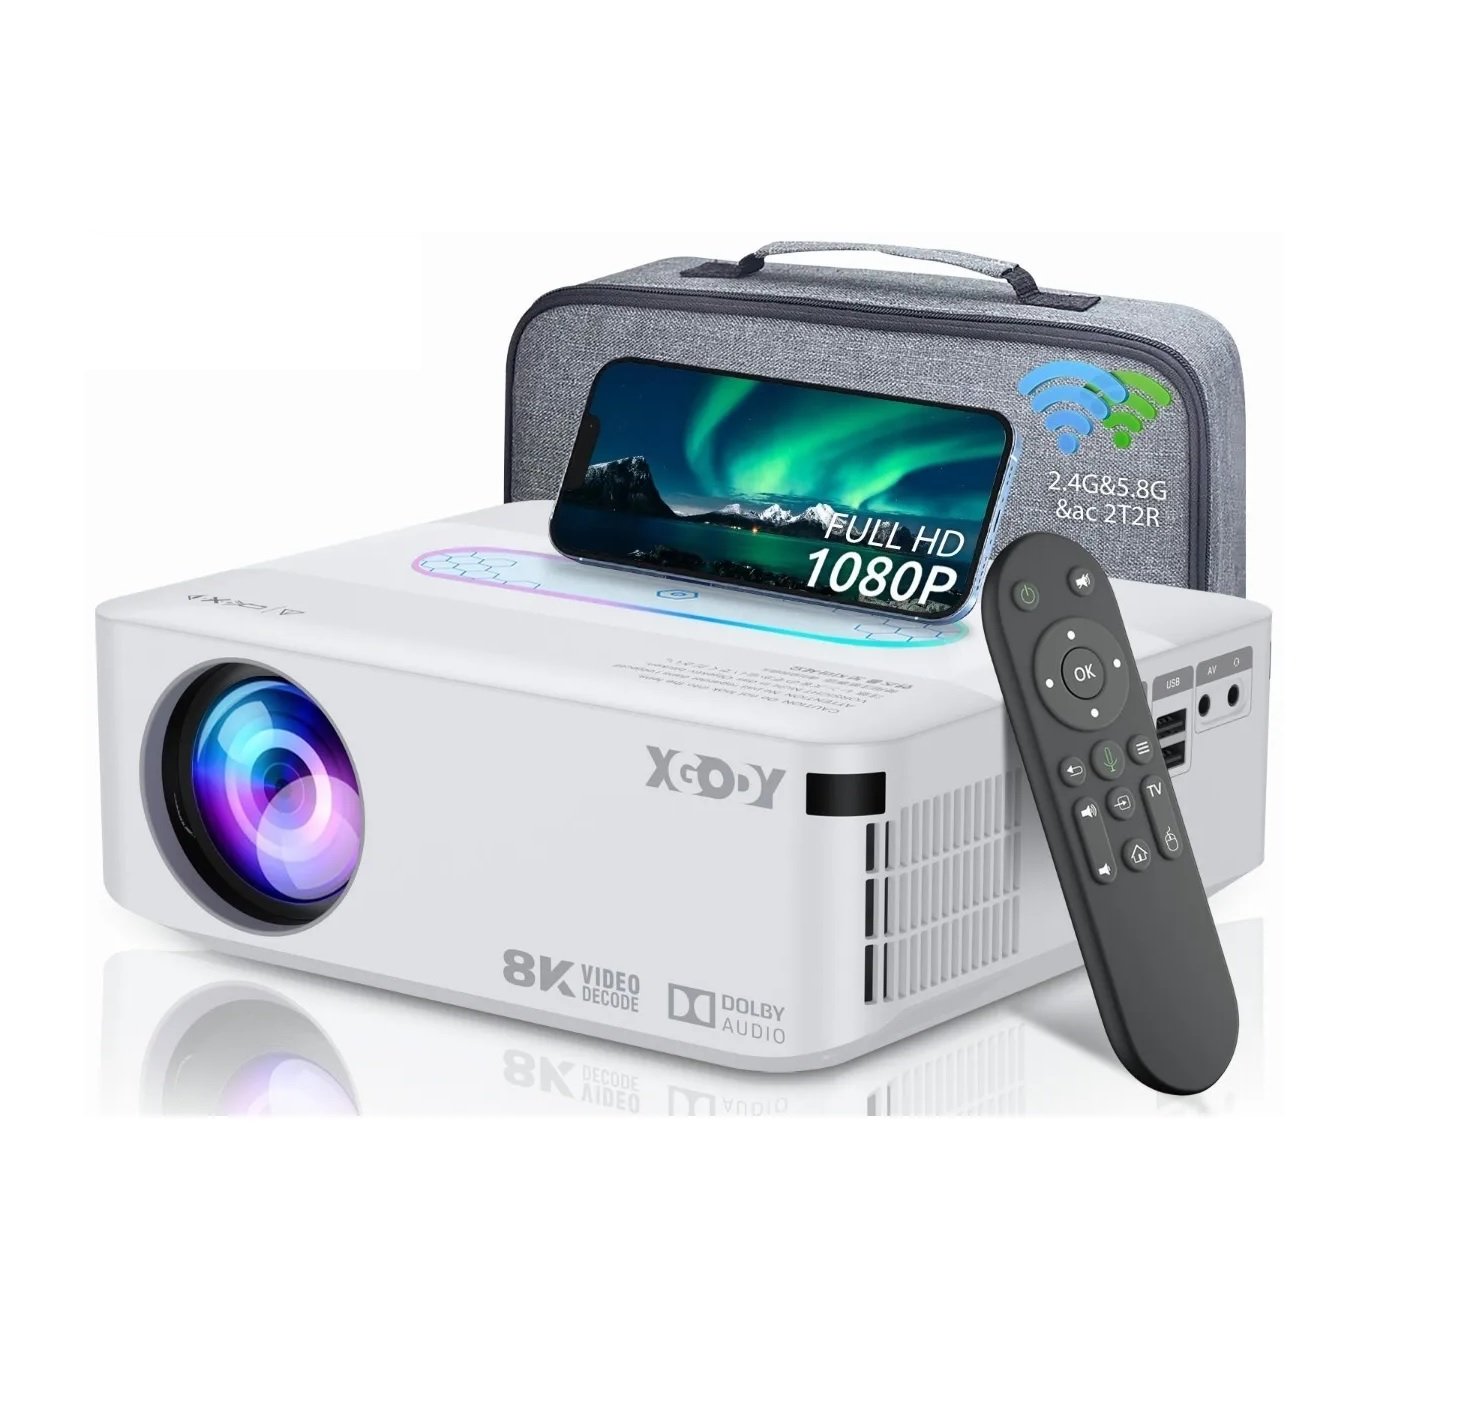 PROYECTOR LED HD SMART ANDROID CON WIFI Y BLUETOOTH!!!!!